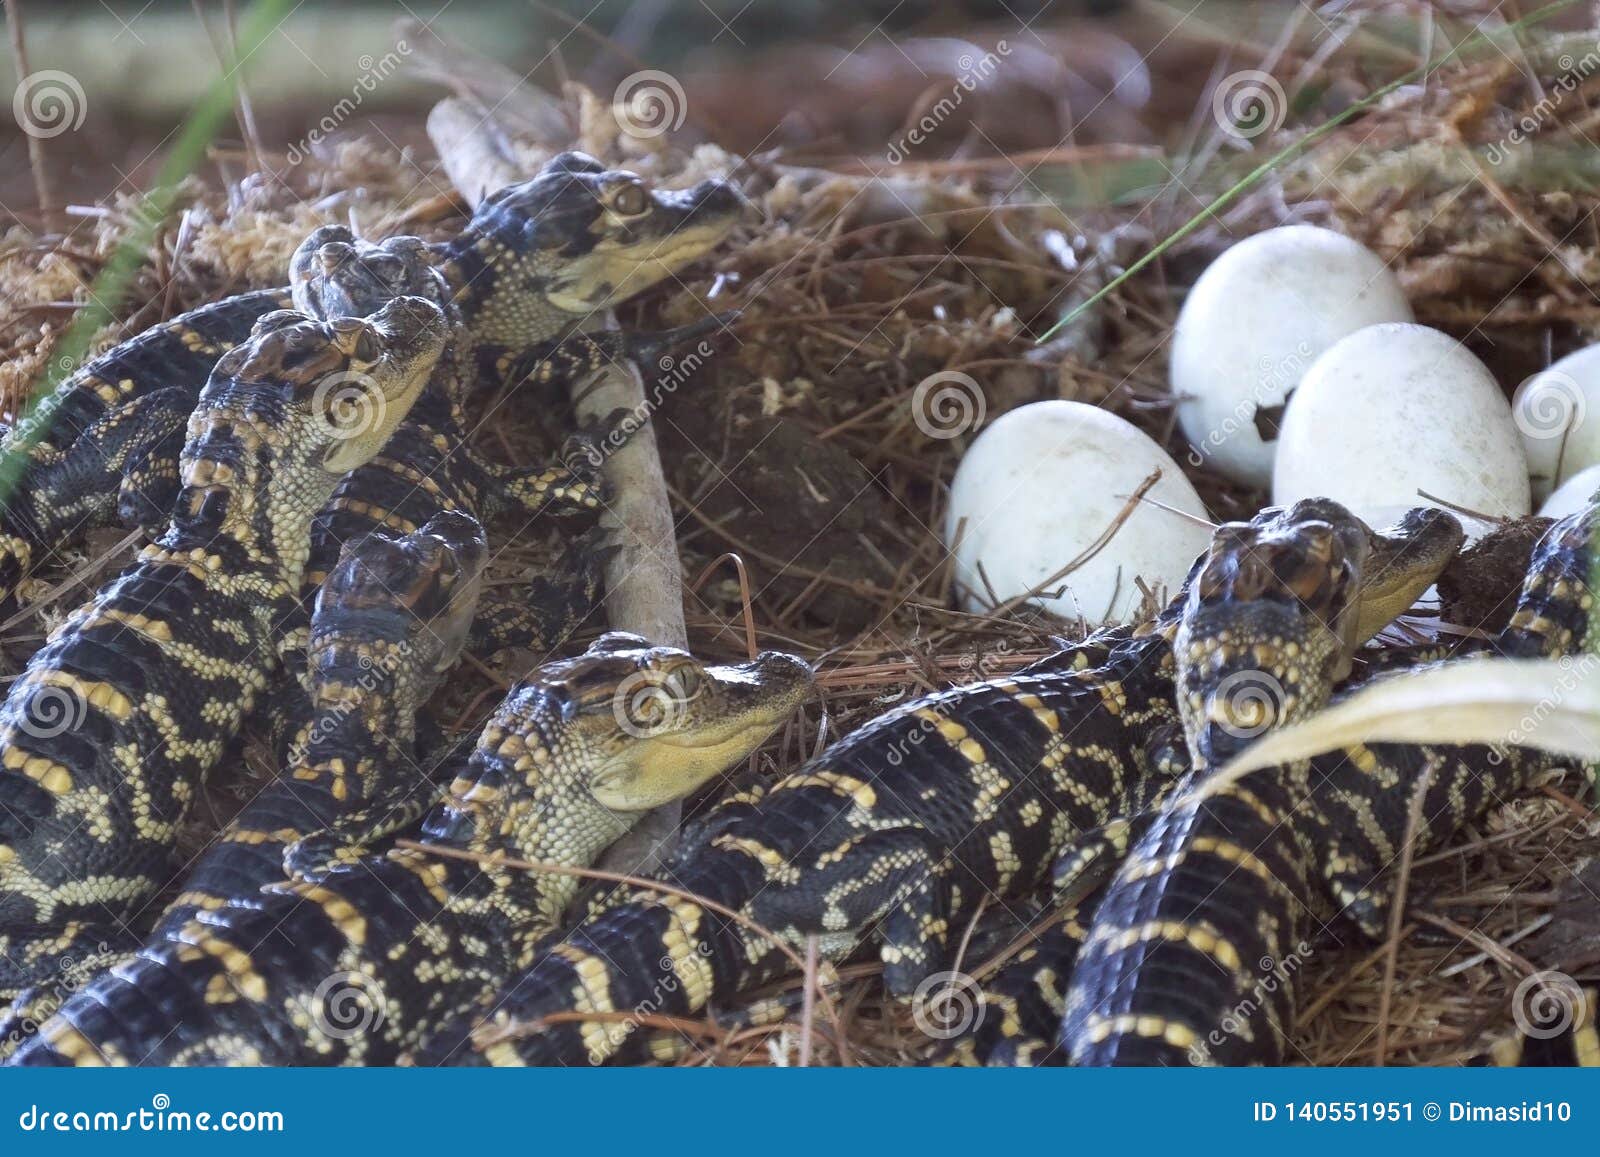 Newborn Alligator Near the Egg Laying in the Nest Stock Image - Image of  animal, everglades: 140551951